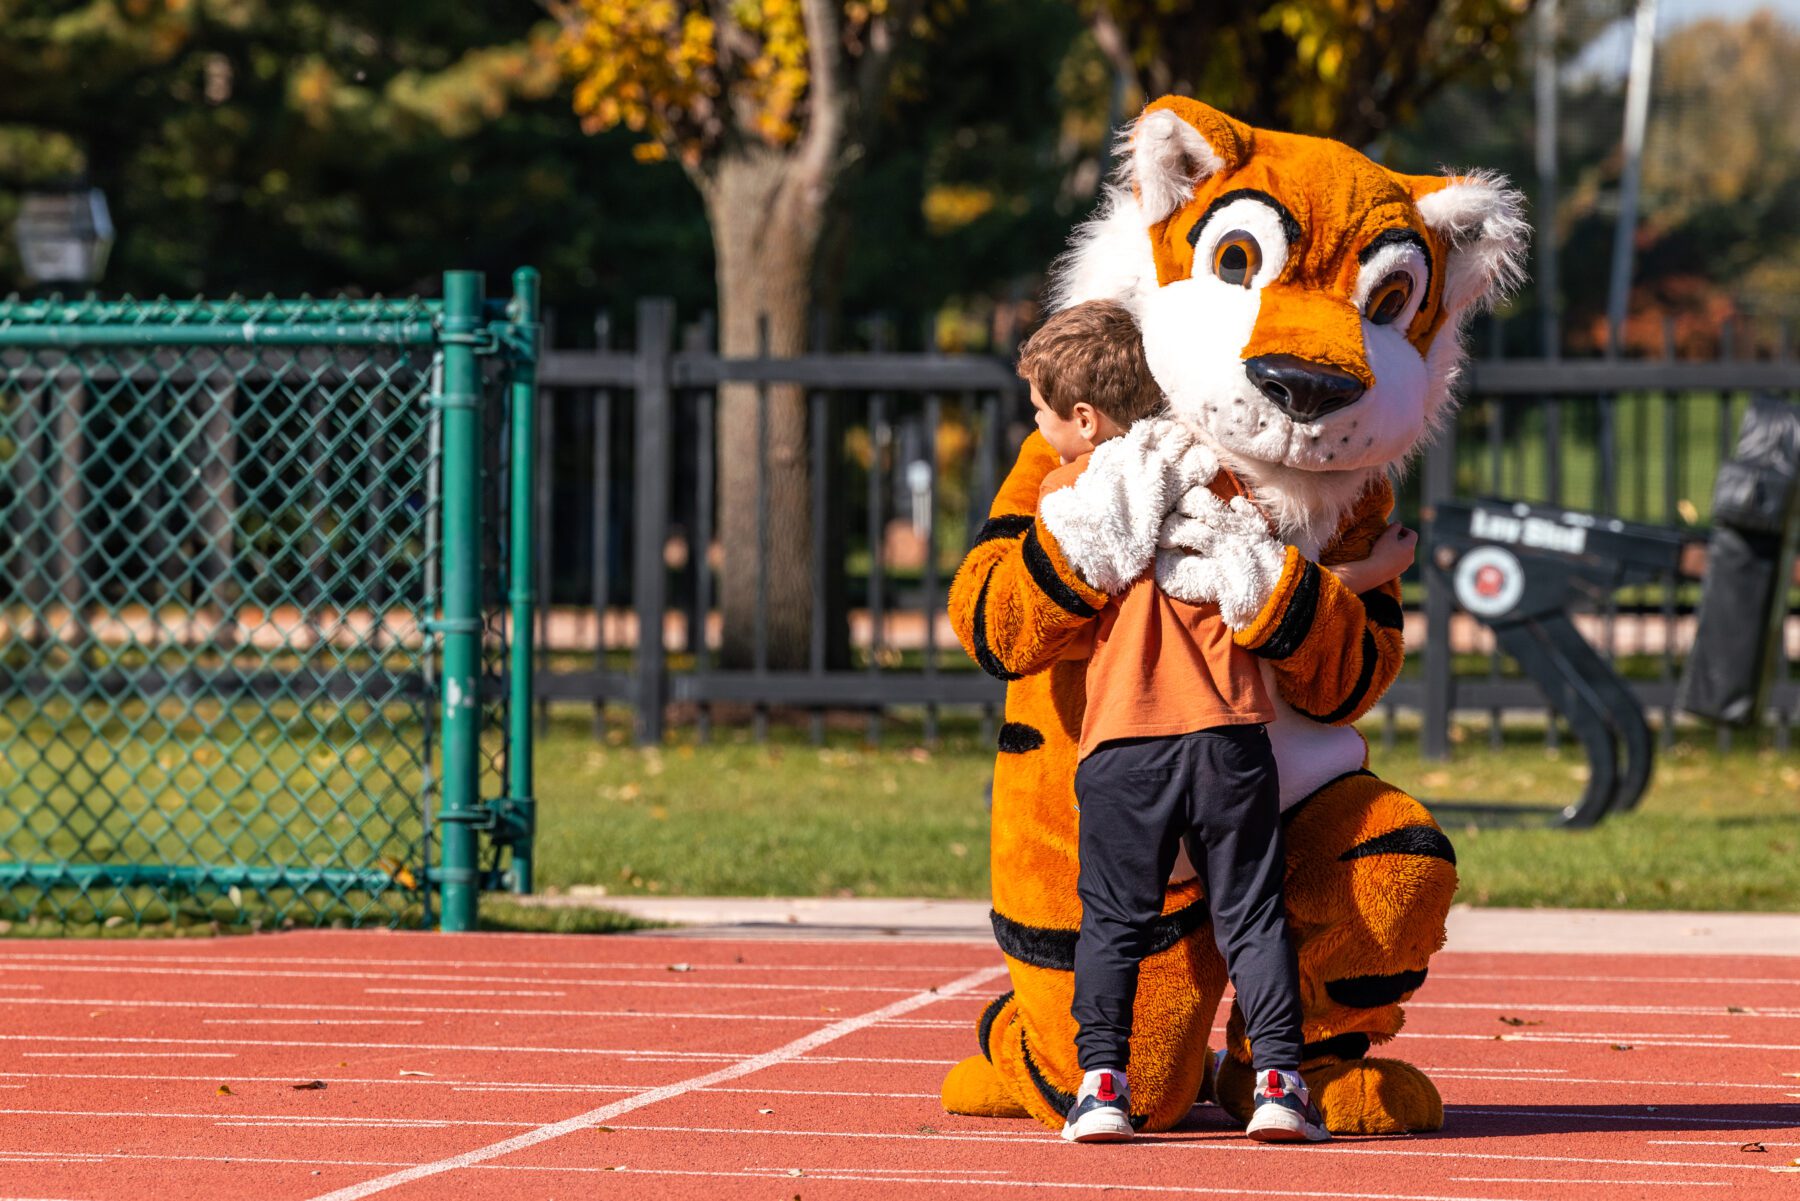 Toby the Tiger embraces a hug from a young boy.